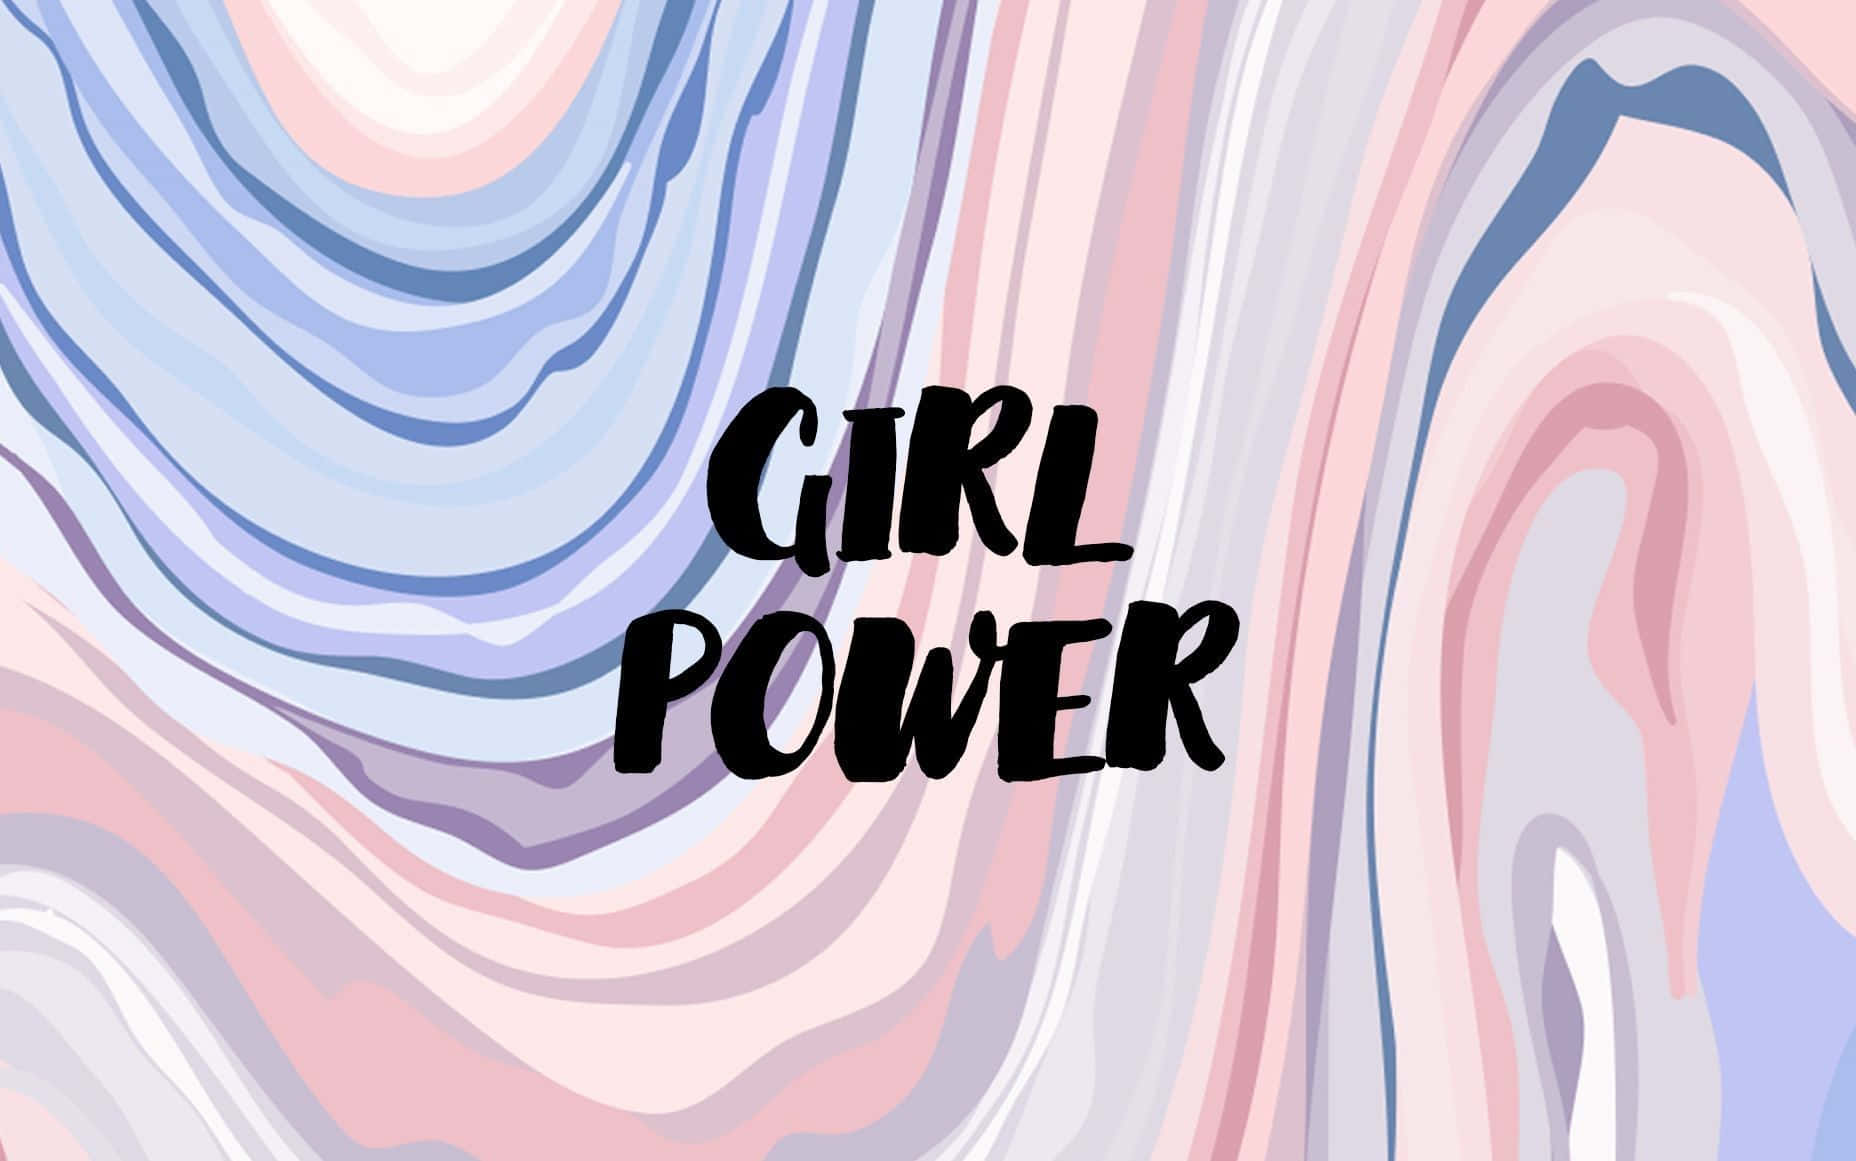 Girl Power 24/7 Motivational Peel and Stick Wallpaper for Women - Be  Unstoppable Removable with Inspirational Quotes and Affirmations -  Repositionable Wall Decor - Easy to Install for Home Decor - Amazon.com